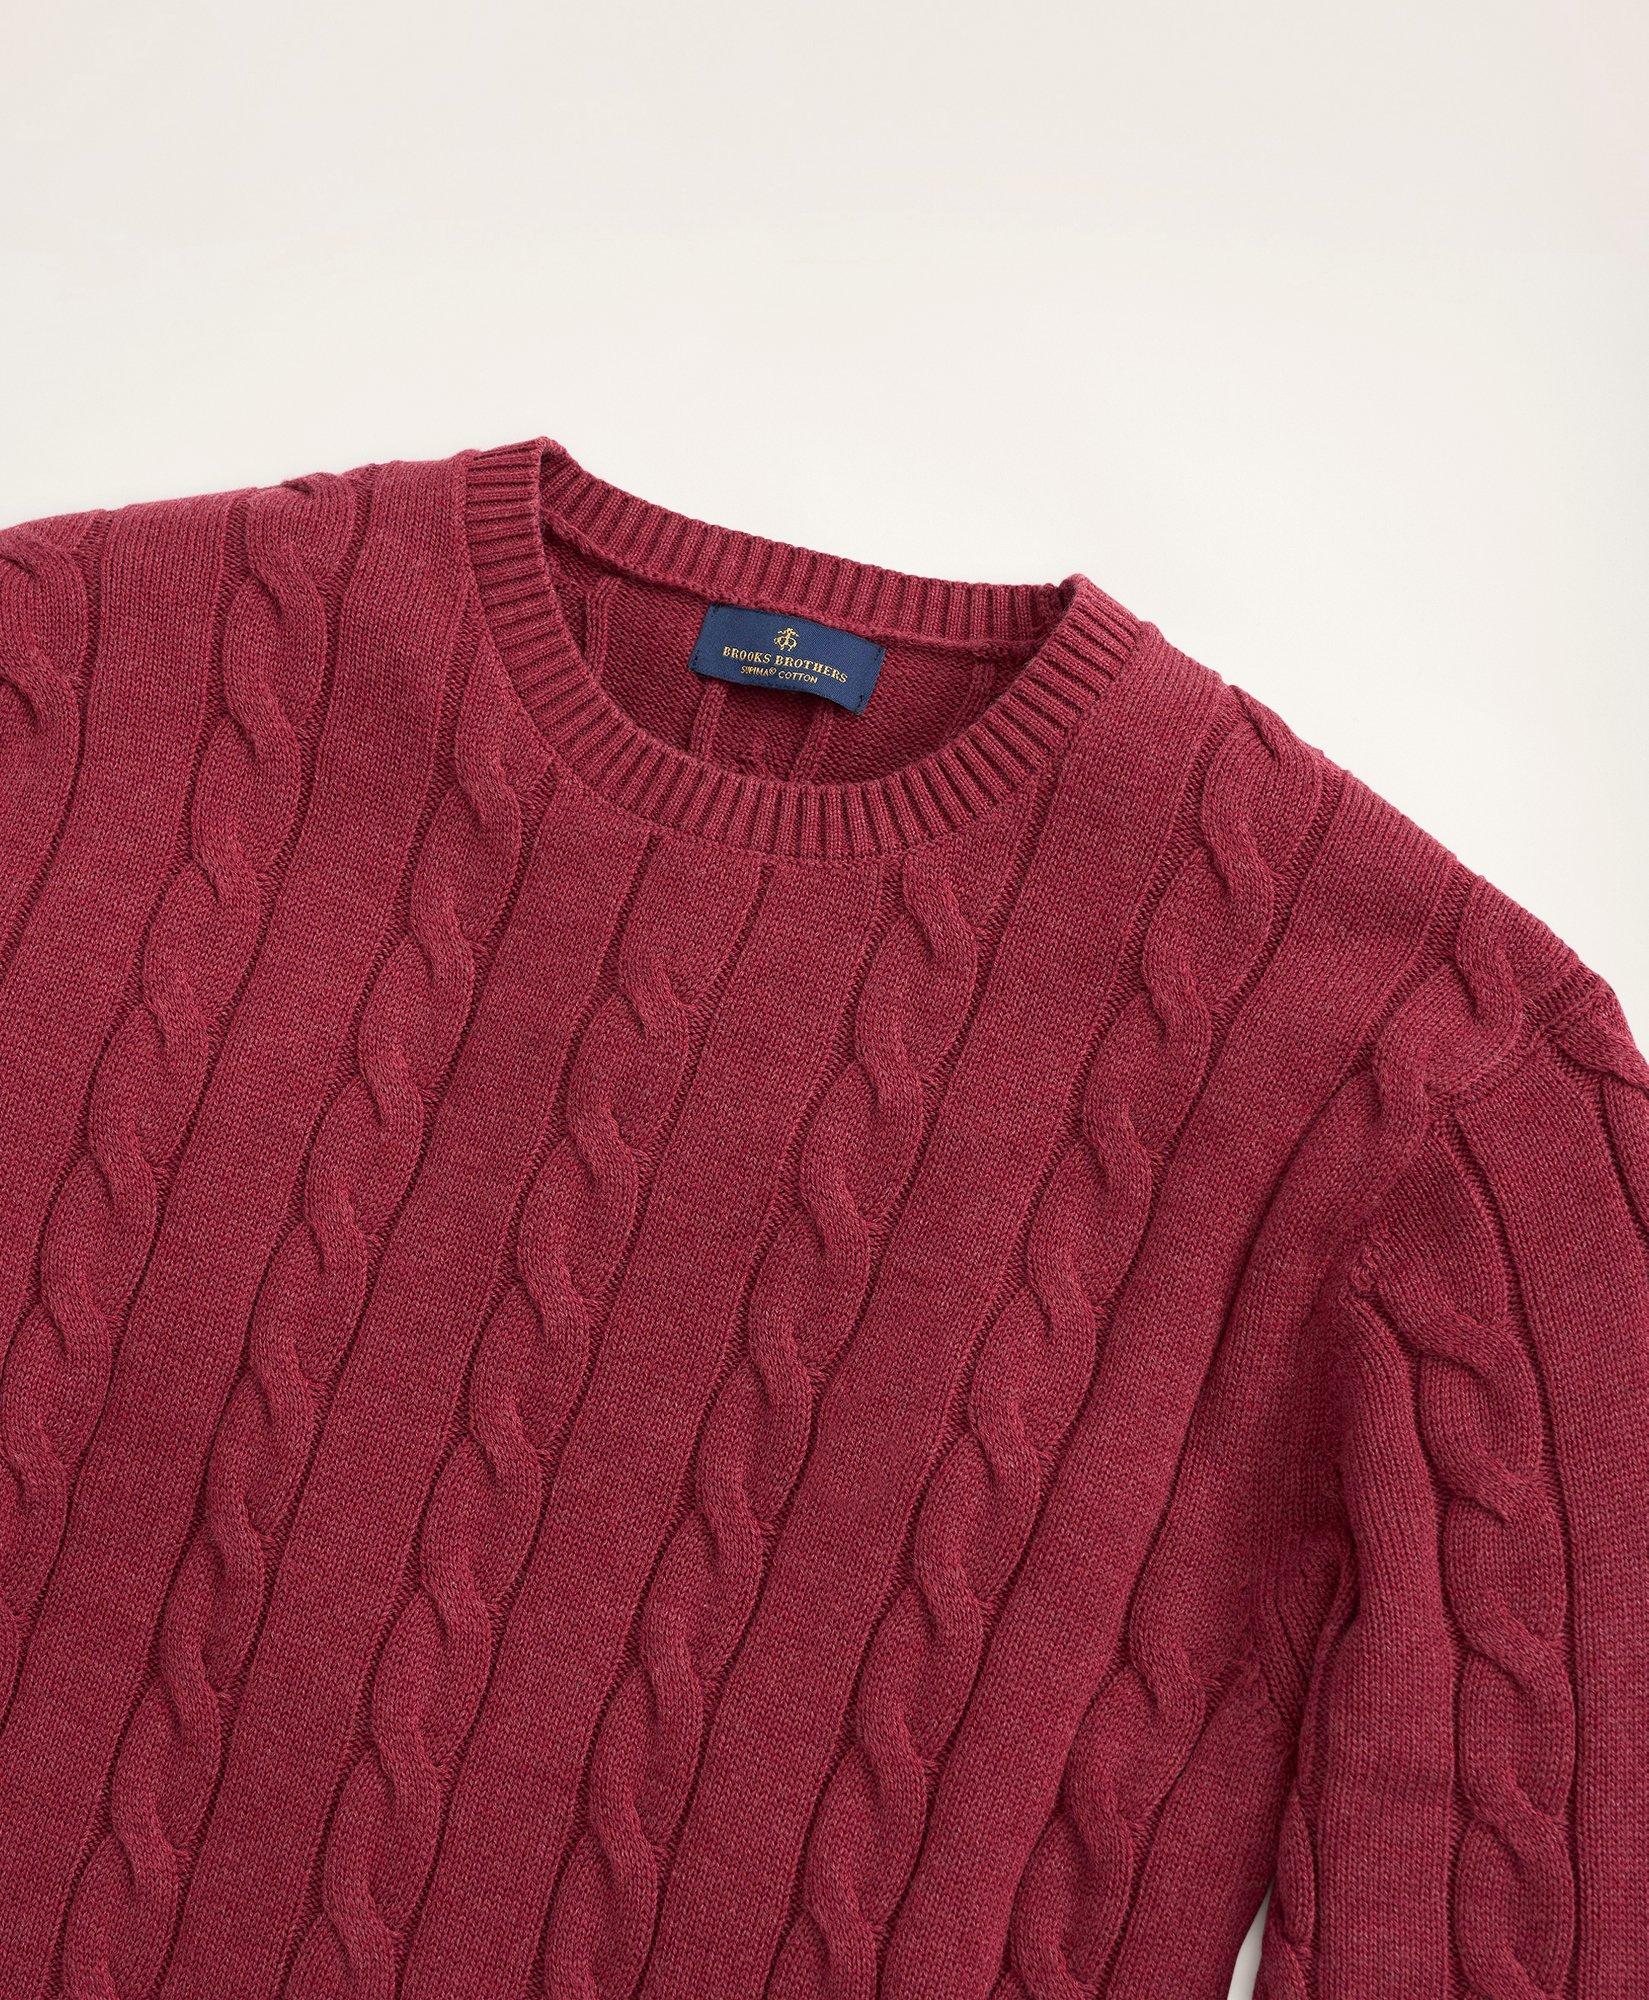 O'Connell's Cotton Knit Zip Mock Sweater - Burgundy Marl - Men's